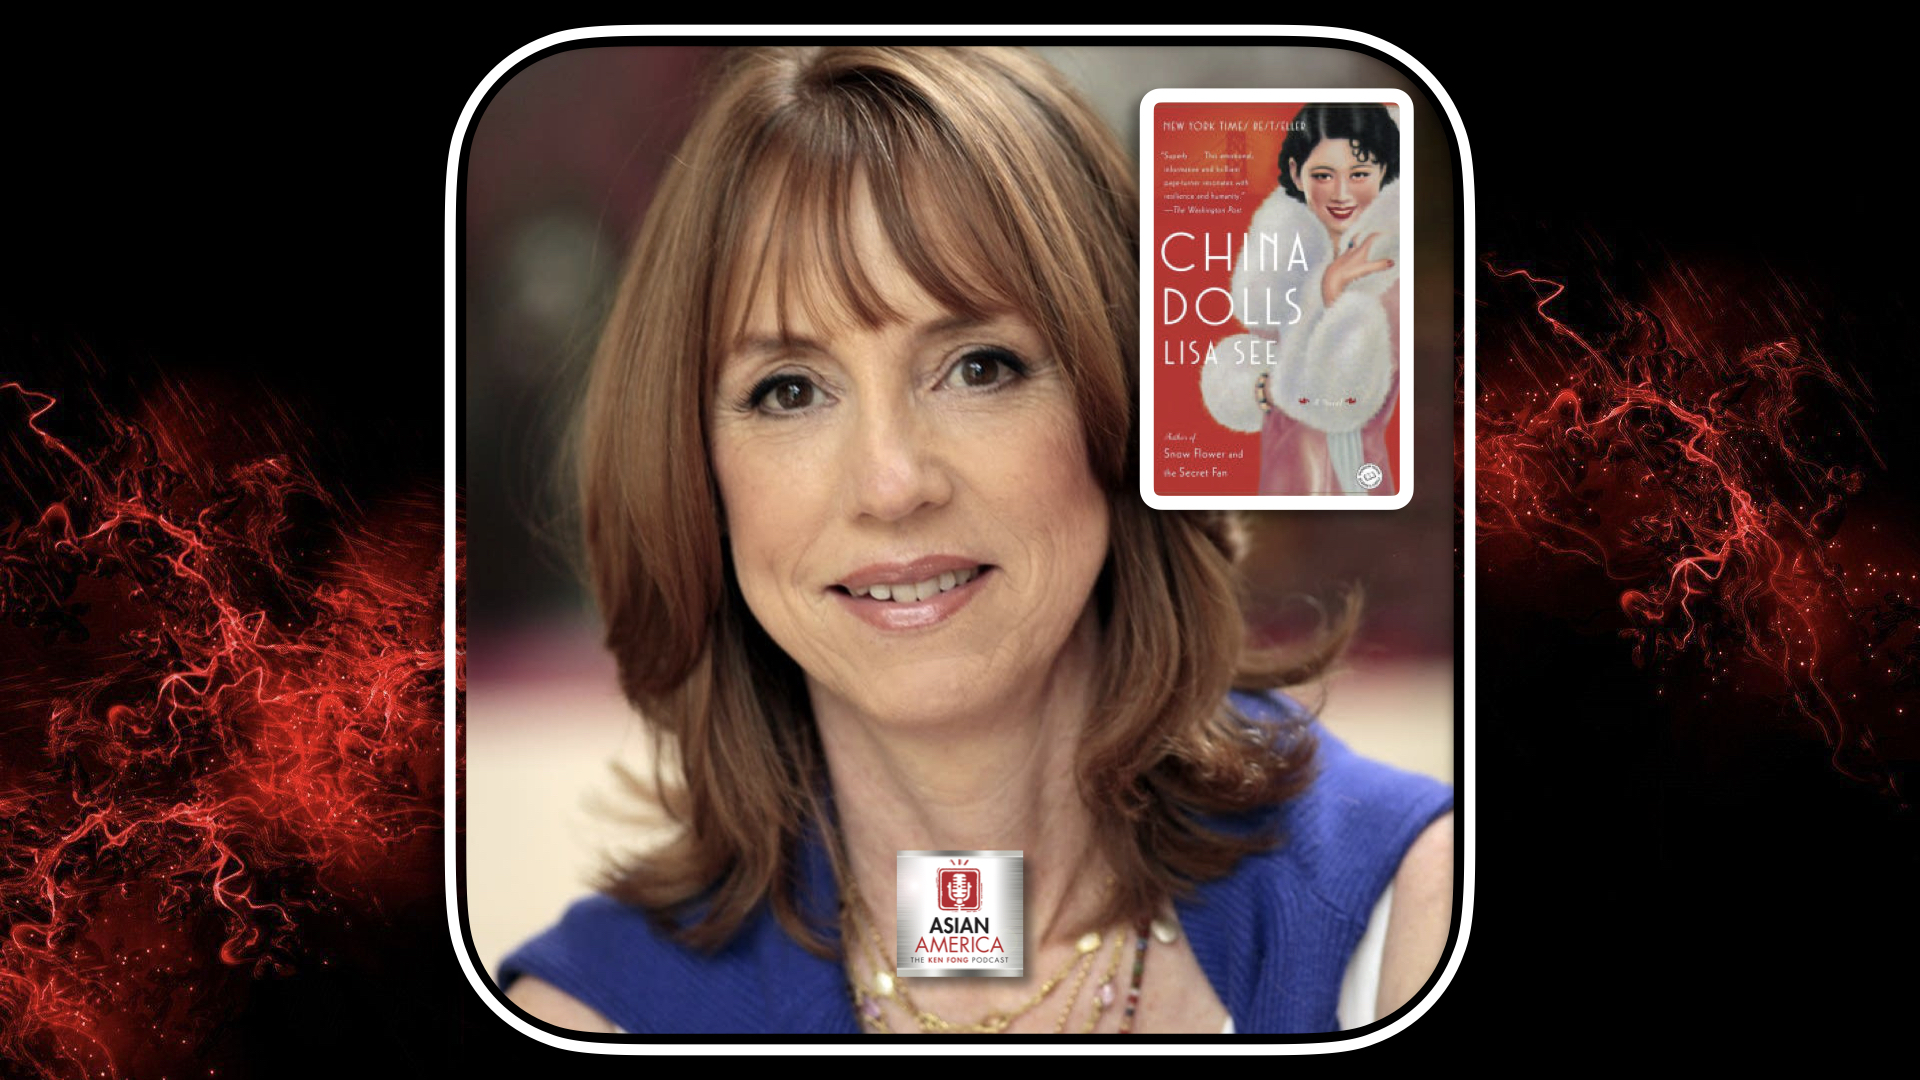 EP 30: Lisa See On Finding Inspiration For Her Novels From Her Large Chinese American Family